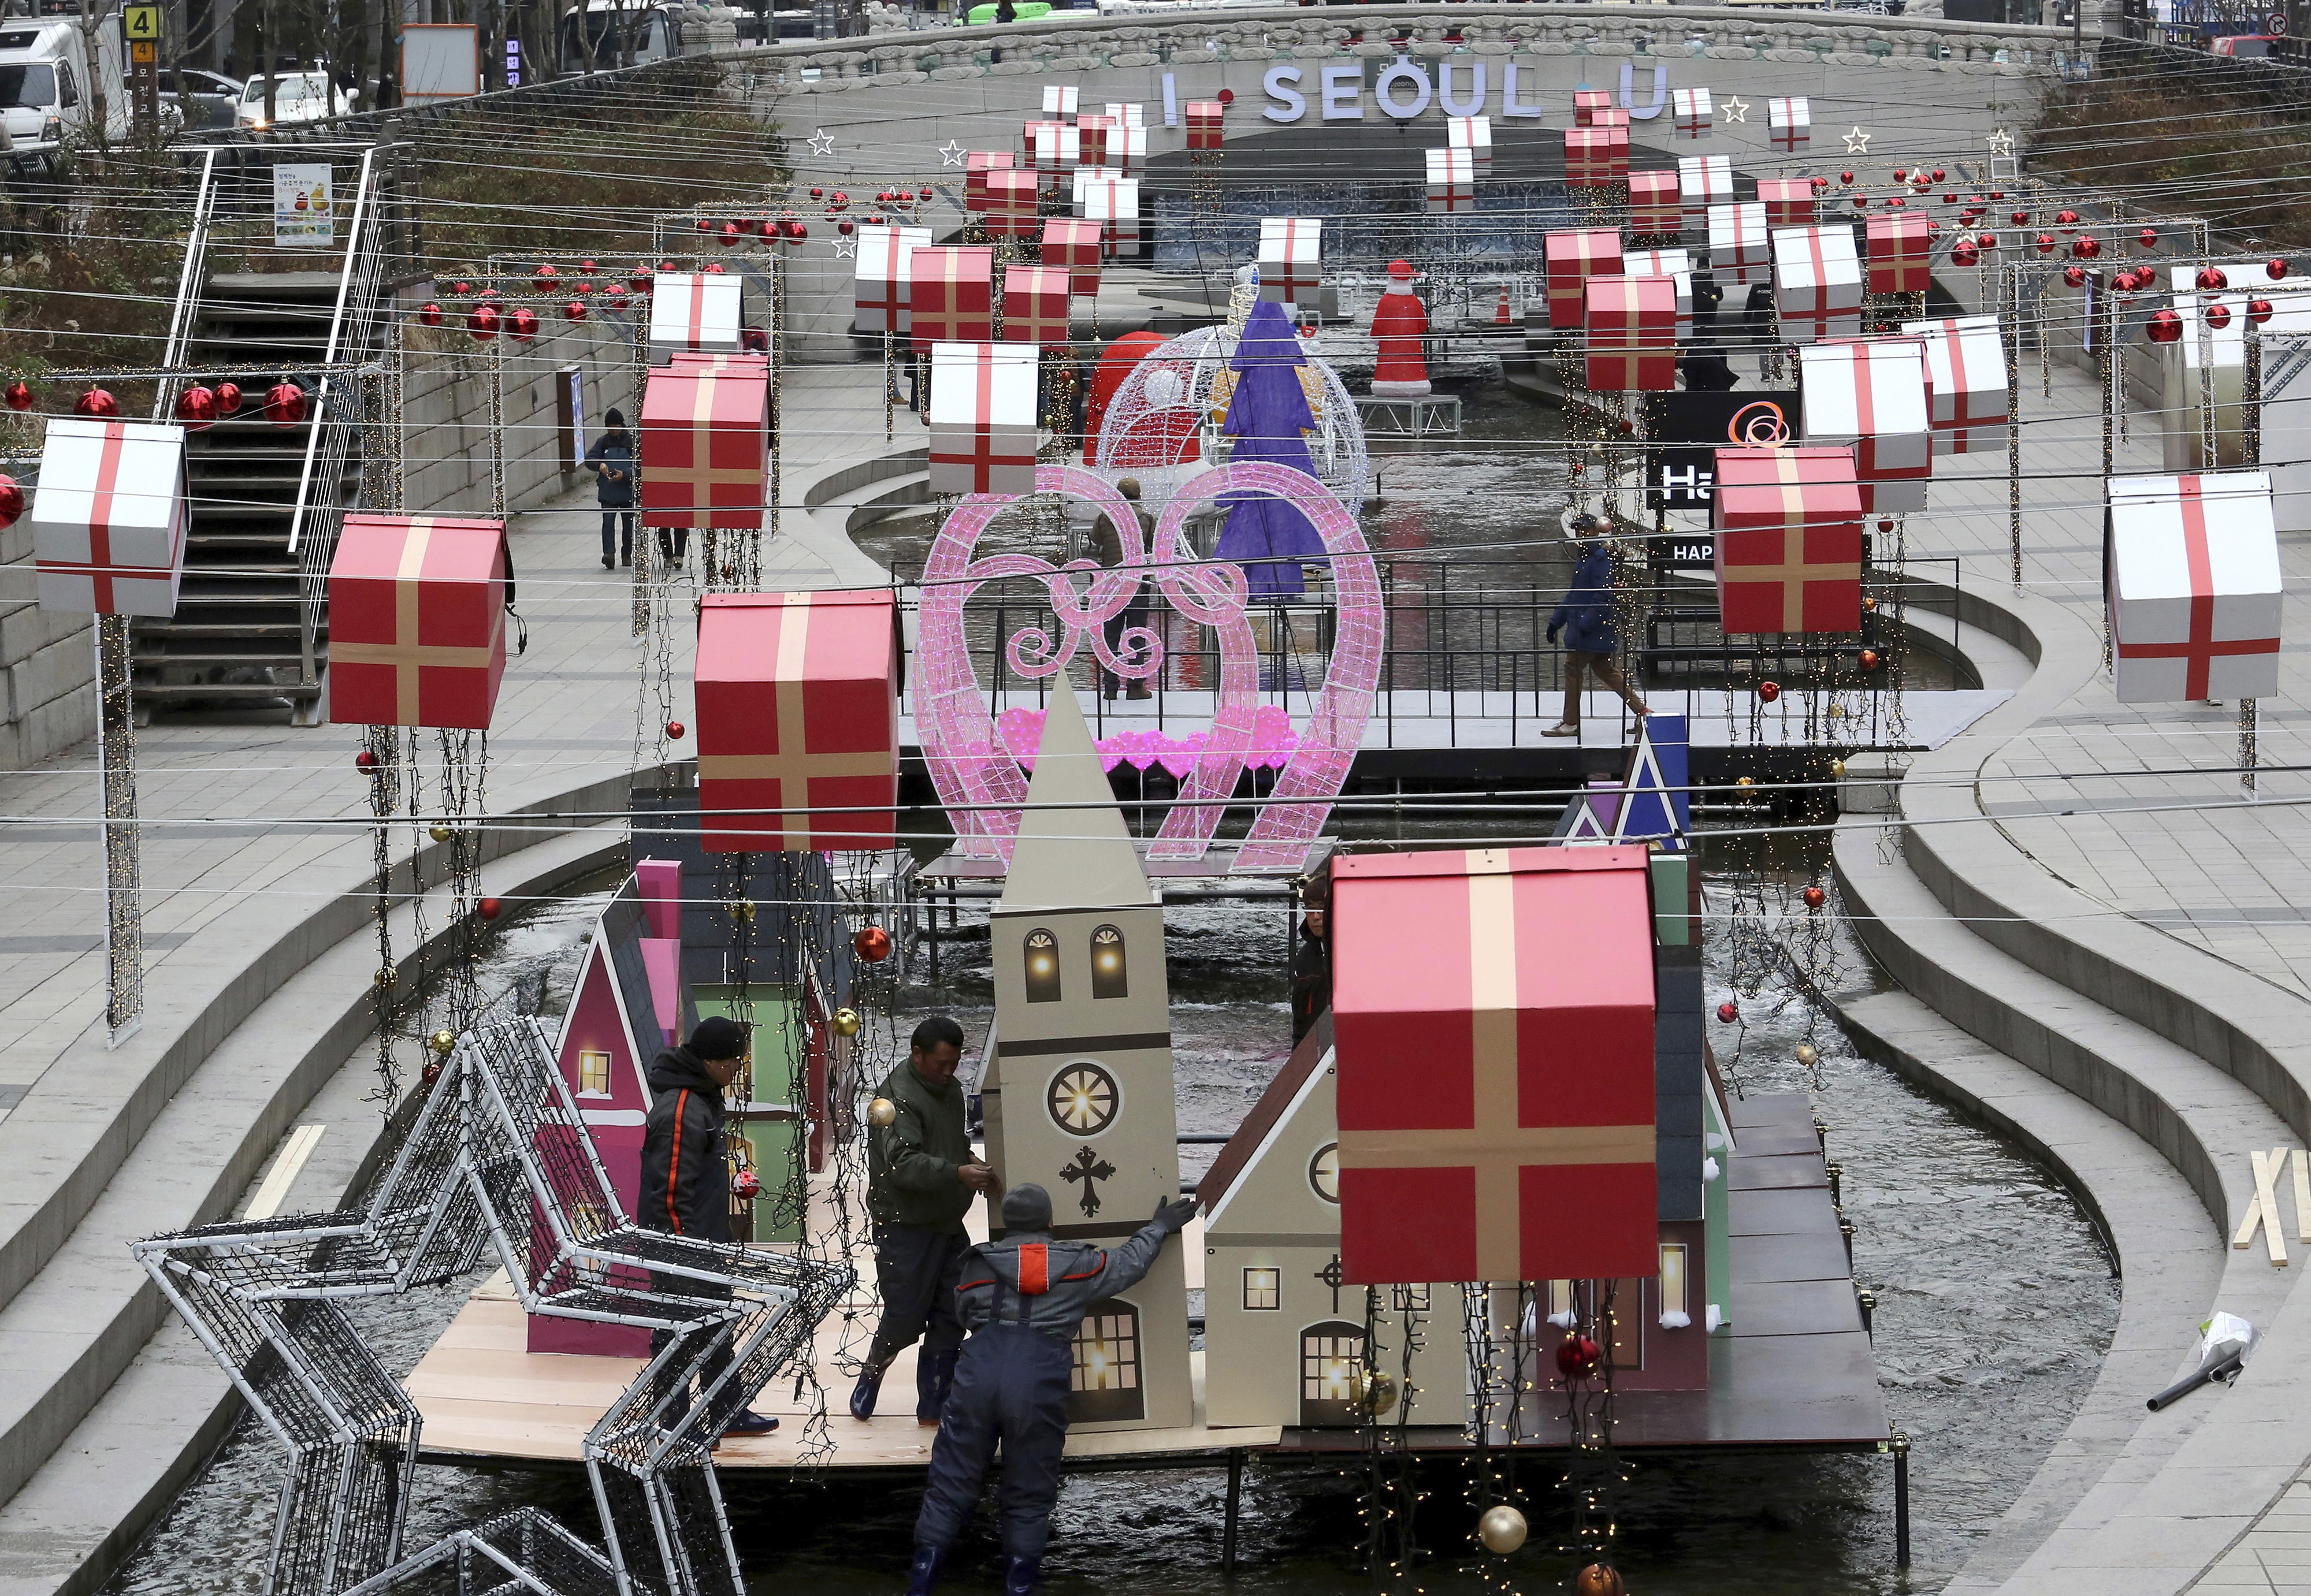 Workers display decorations to celebrate Christmas and New Year over the Cheonggye Stream in Seoul, South Korea, Tuesday, Dec. 11, 2018. (AP Photo/Ahn Young-joon)